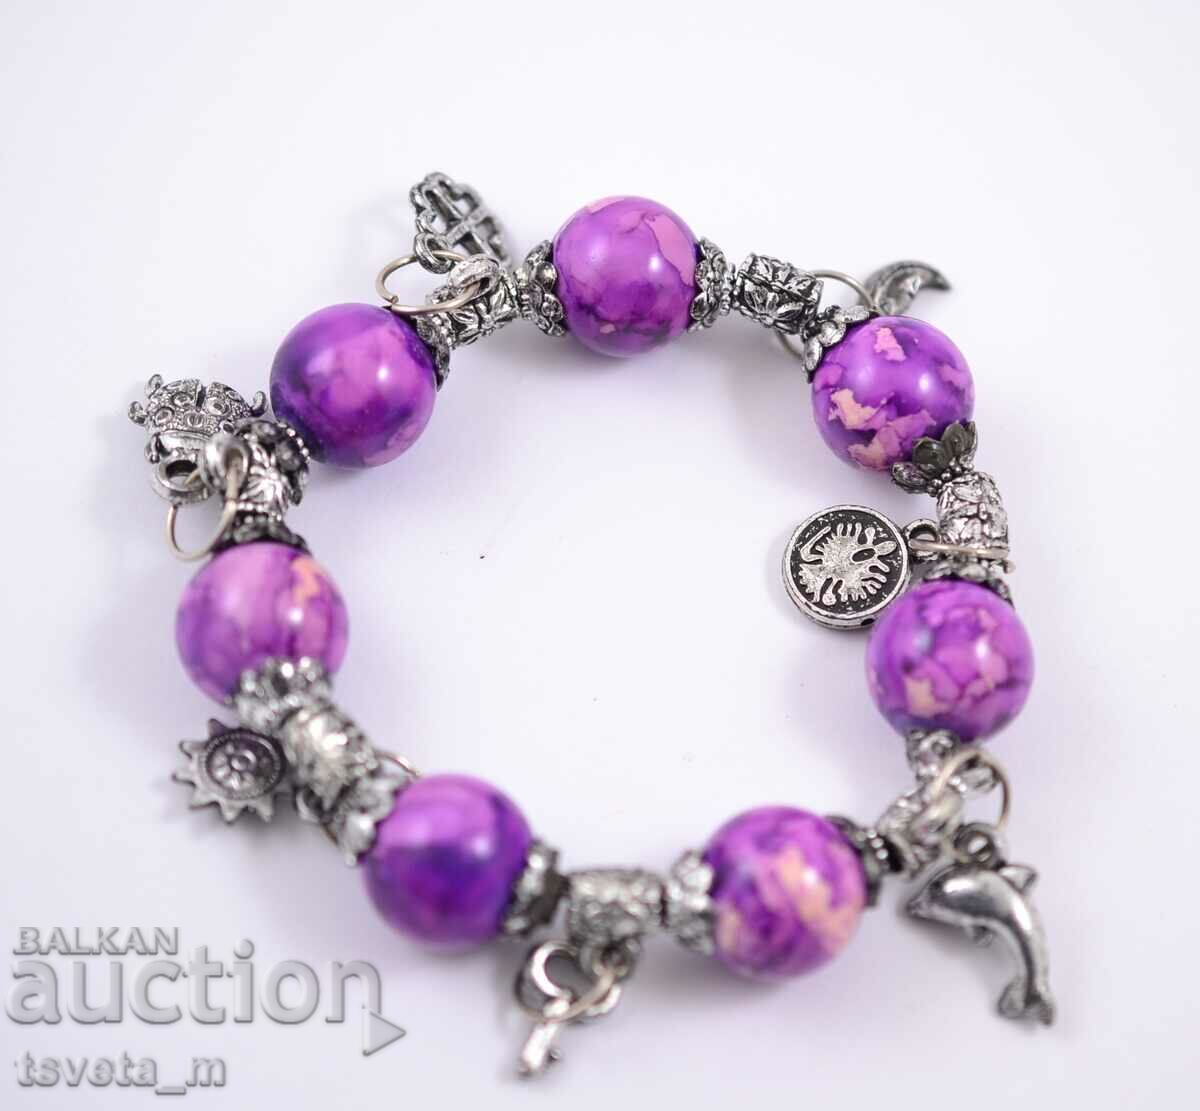 Elastic bracelet with charms